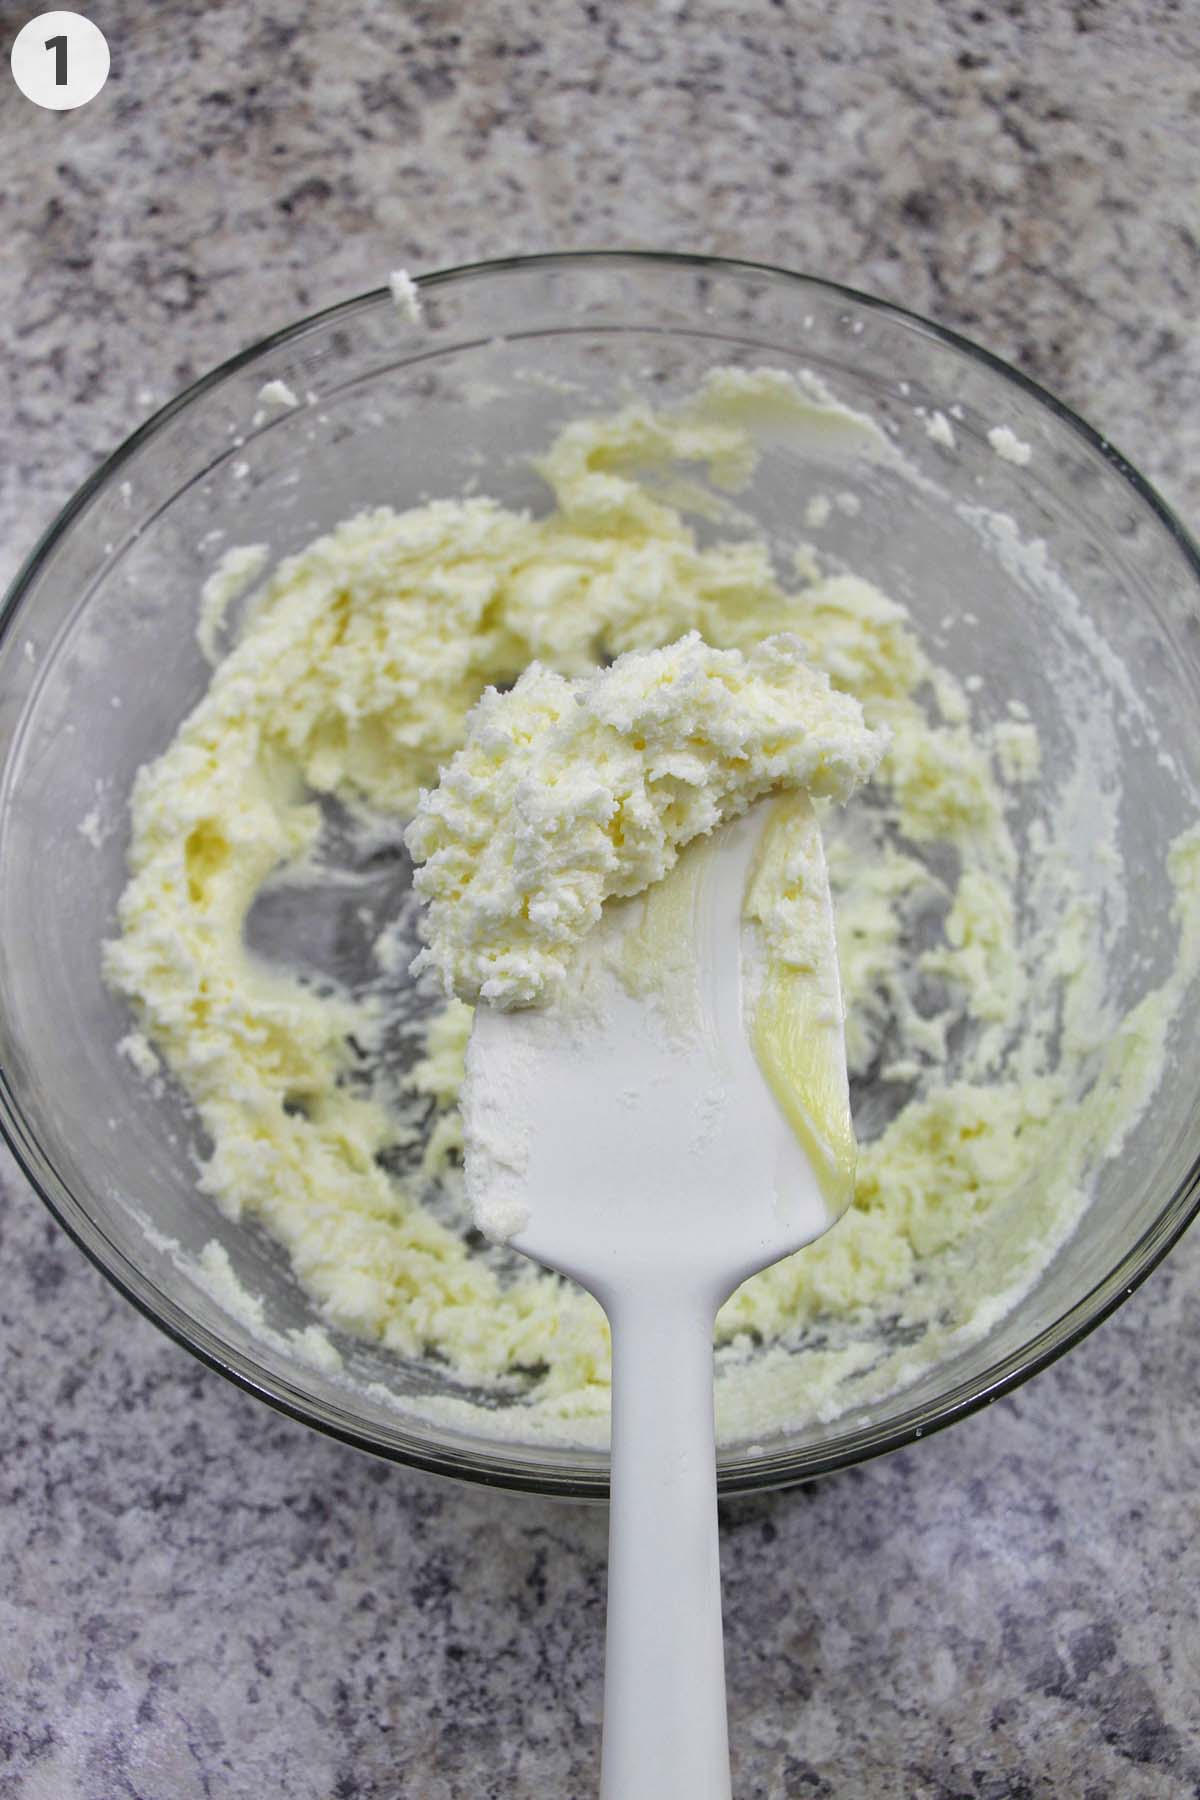 numbered photo showing creamed butter on a silicone spatula.